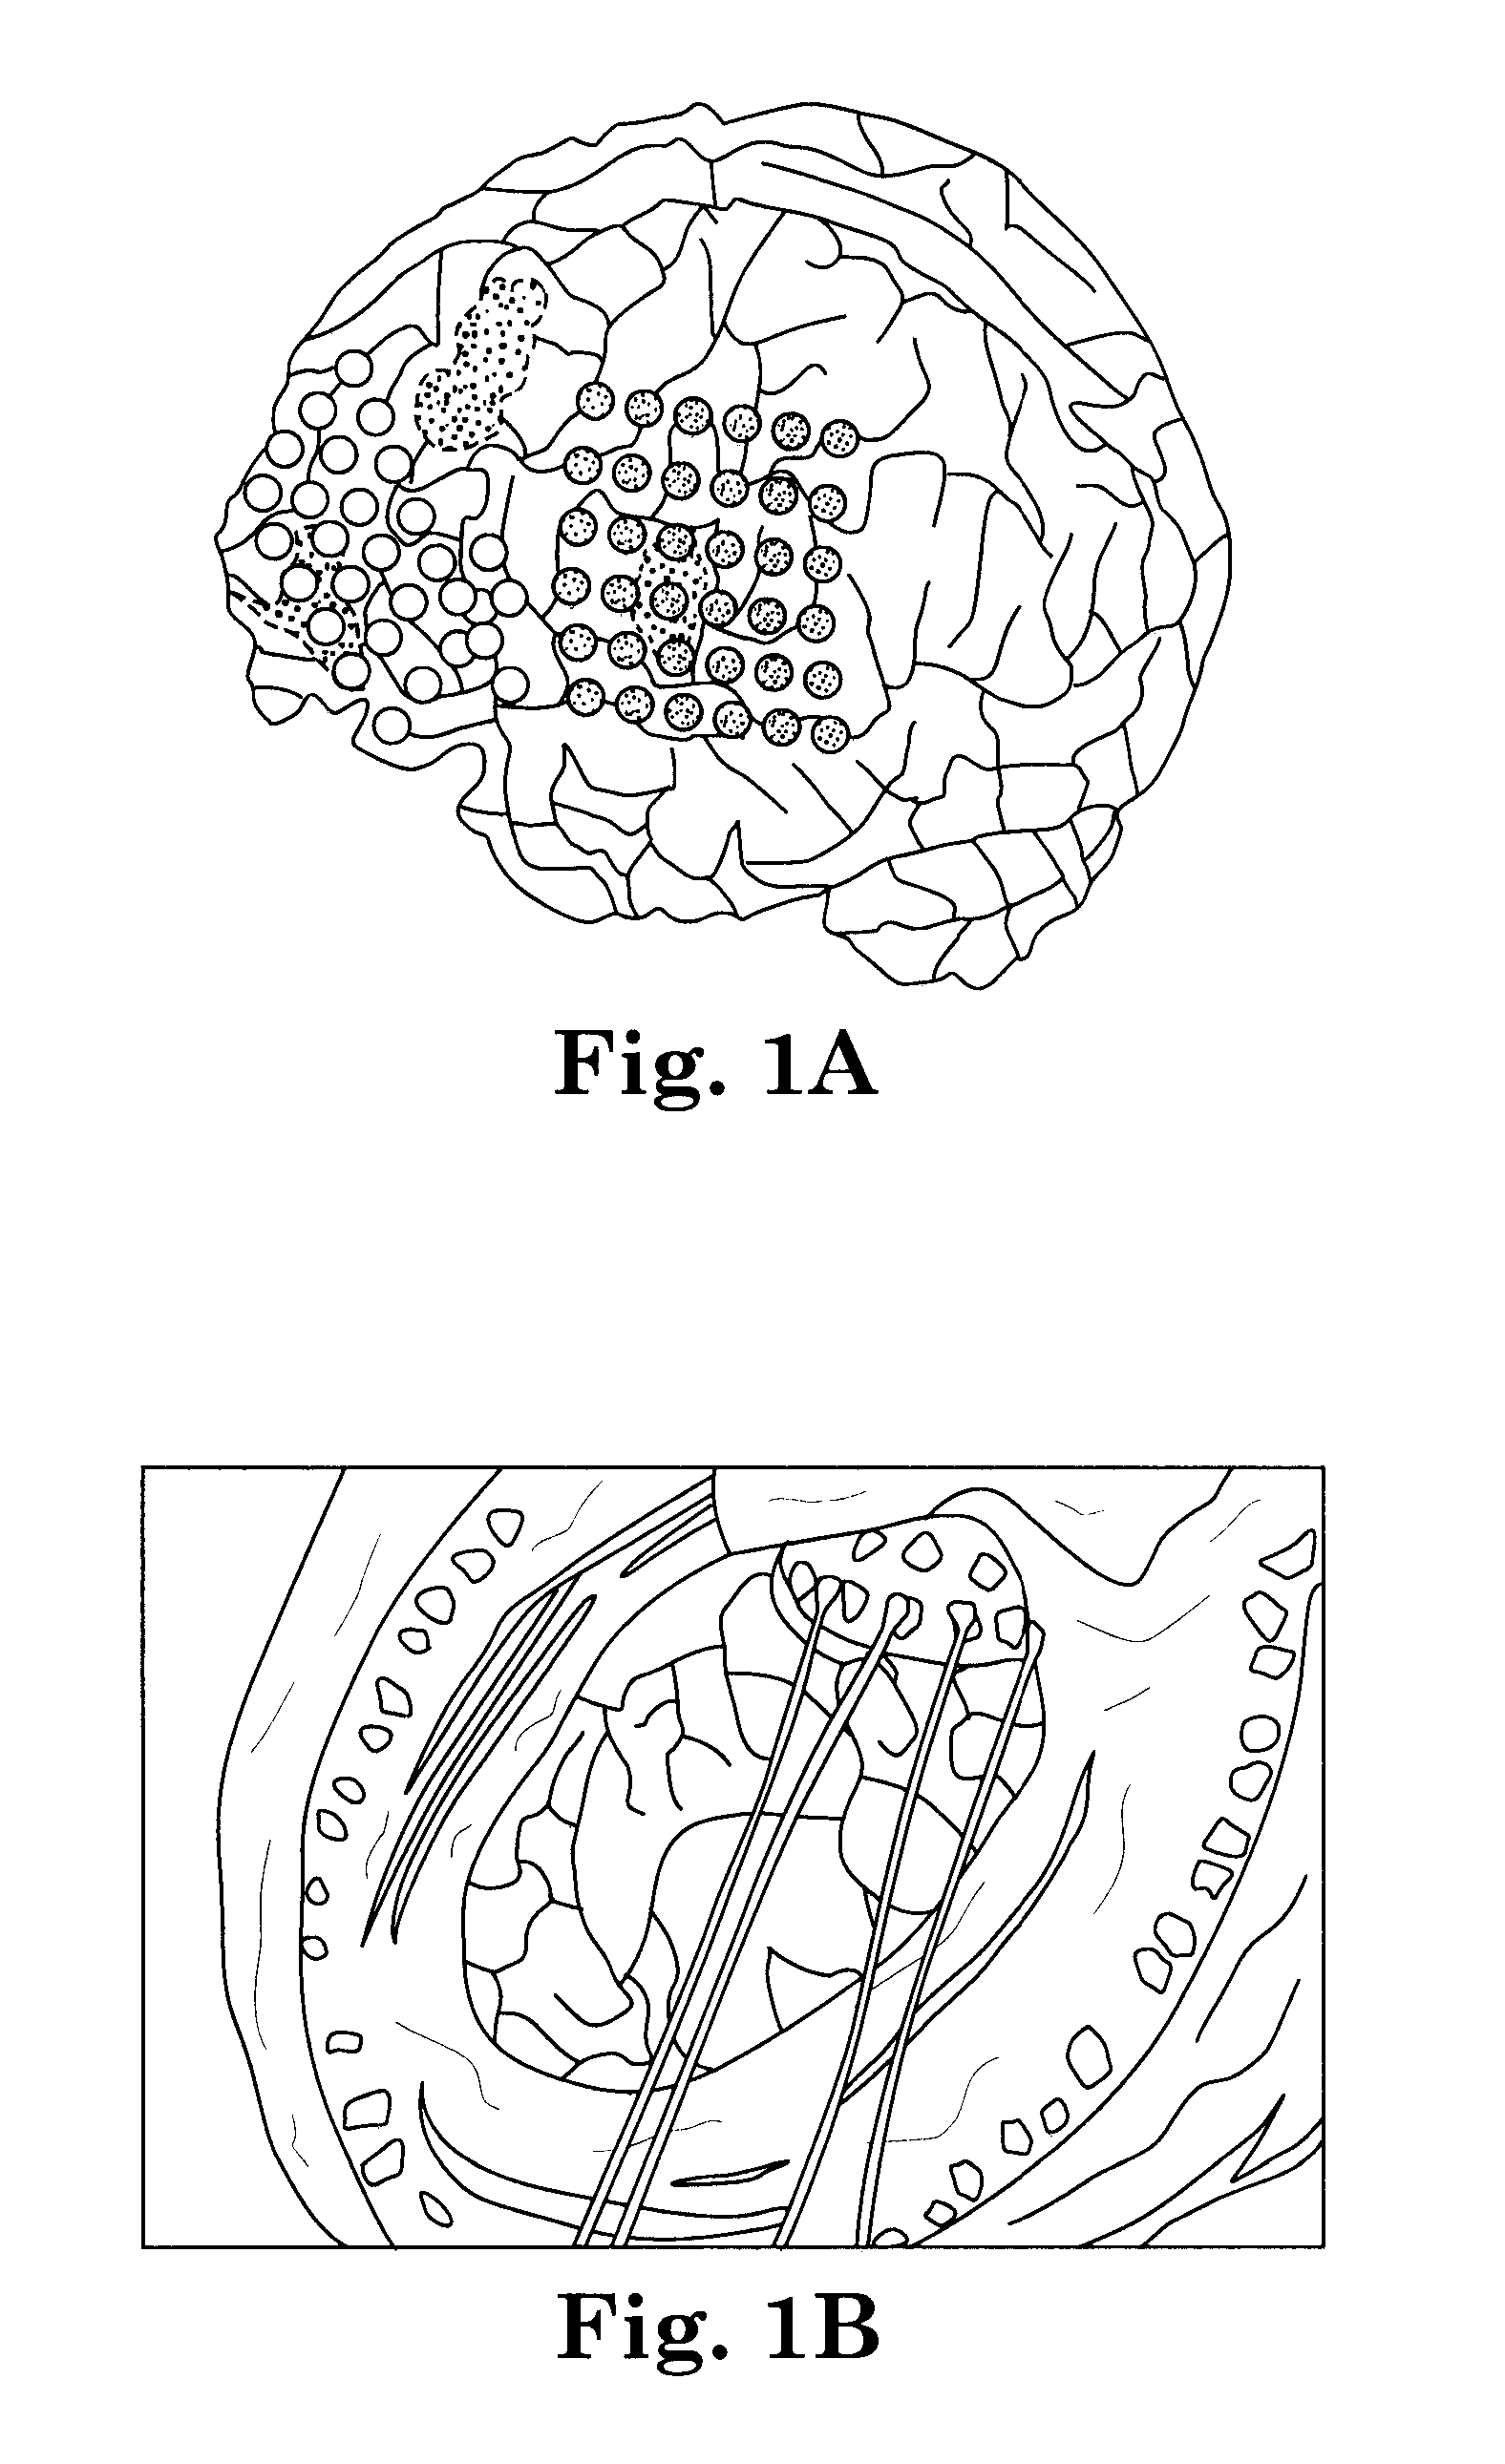 Seizure forecasting, microseizure precursor events, and related therapeutic methods and devices